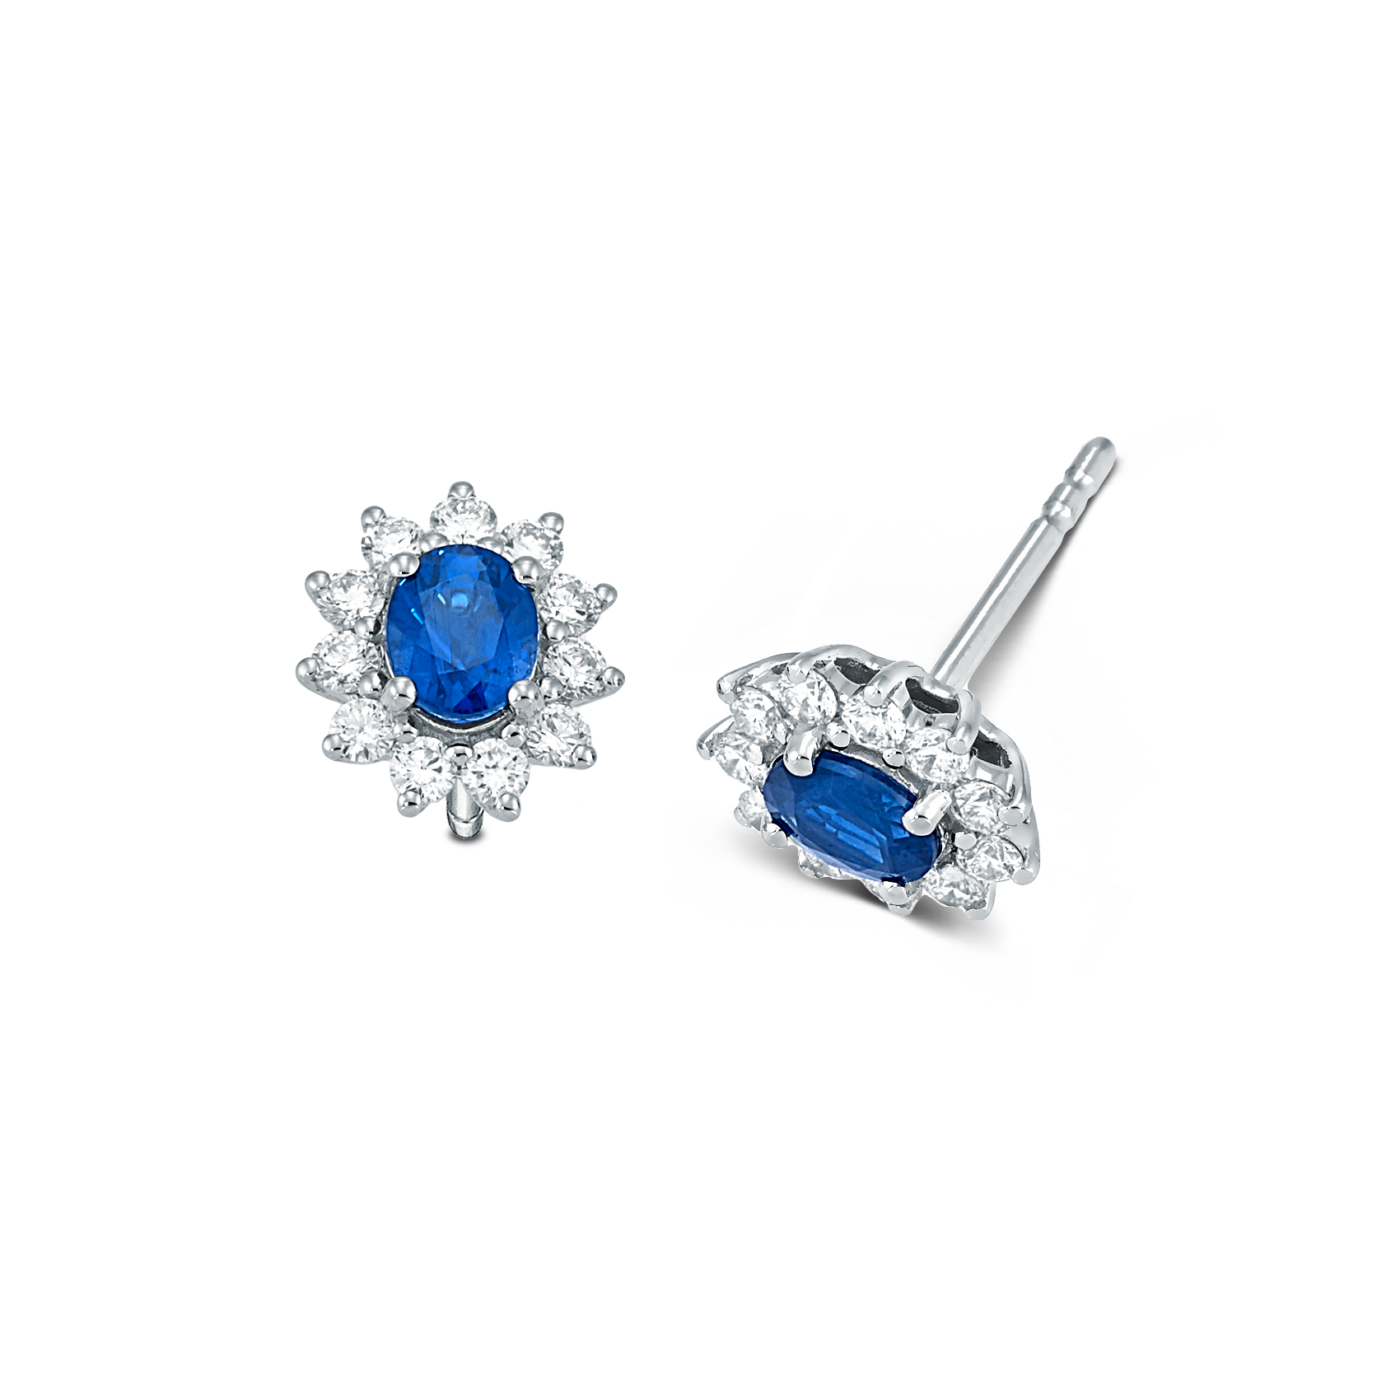 Devous Earrings with Blue Sapphire and Diamonds